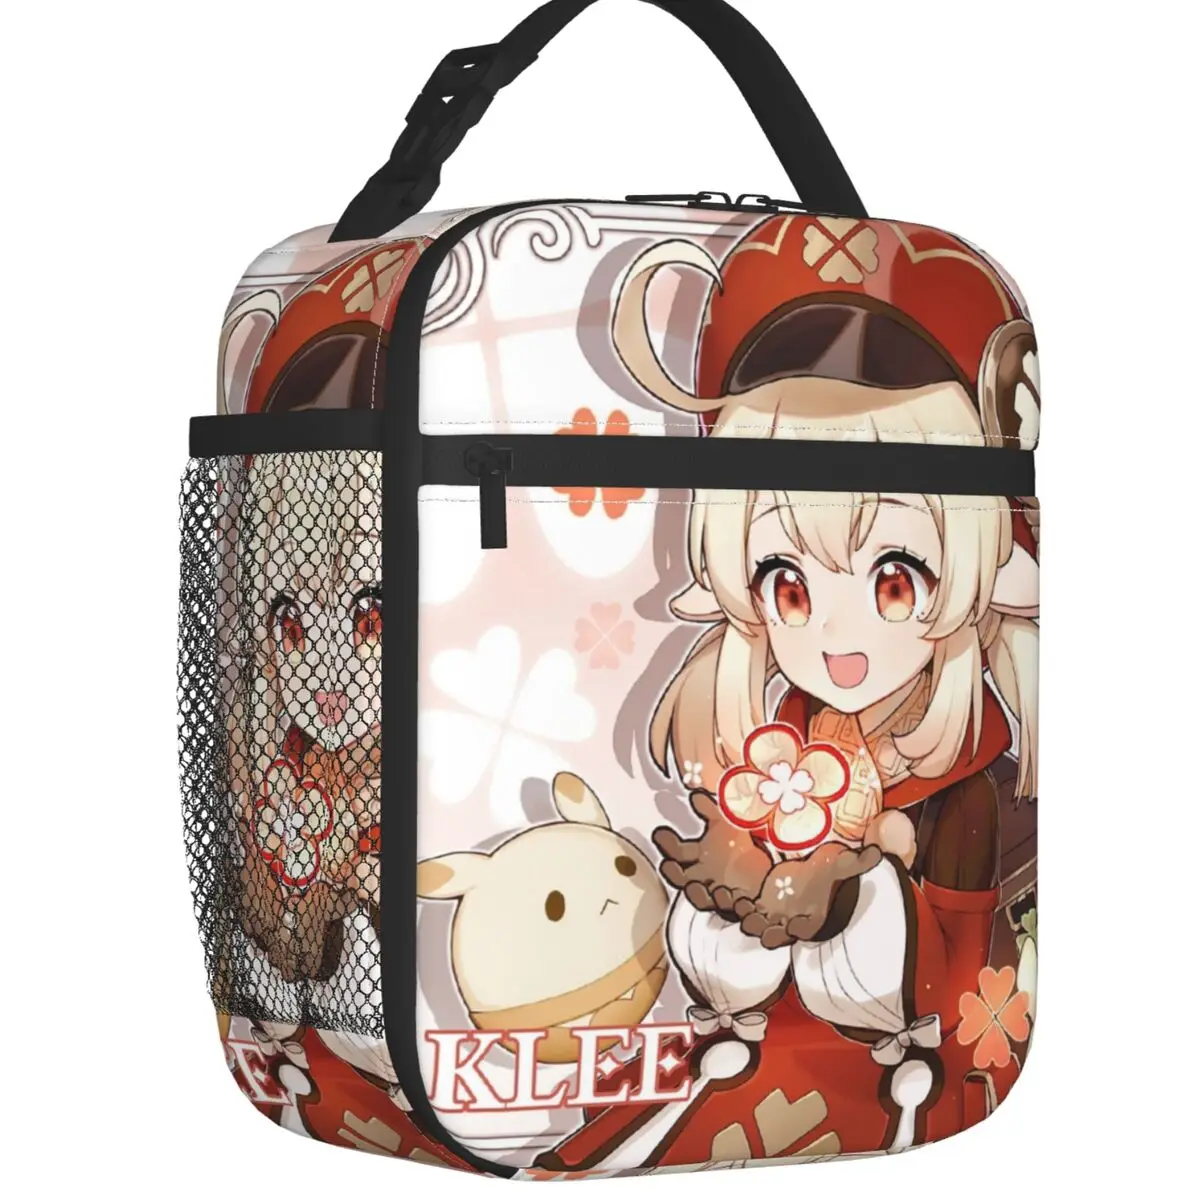 Genshin Impact Klee Insulated Lunch Bags for Camping Travel Anime Game Waterproof Cooler Thermal Bento Box Women Kids